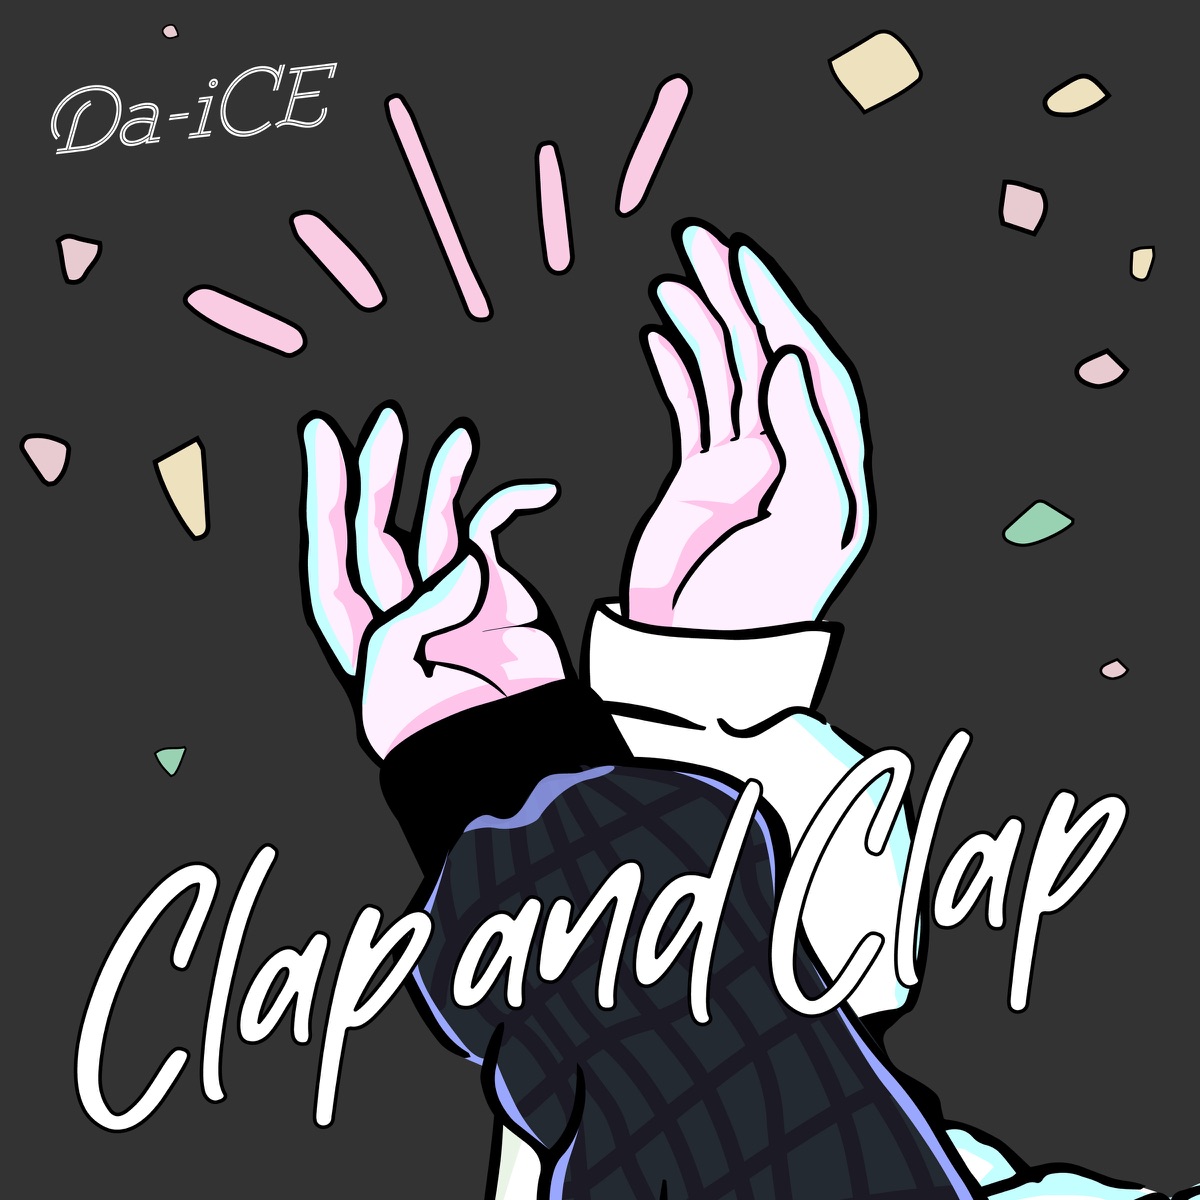 Cover art for『Da-iCE - Clap and Clap』from the release『Clap and Clap』